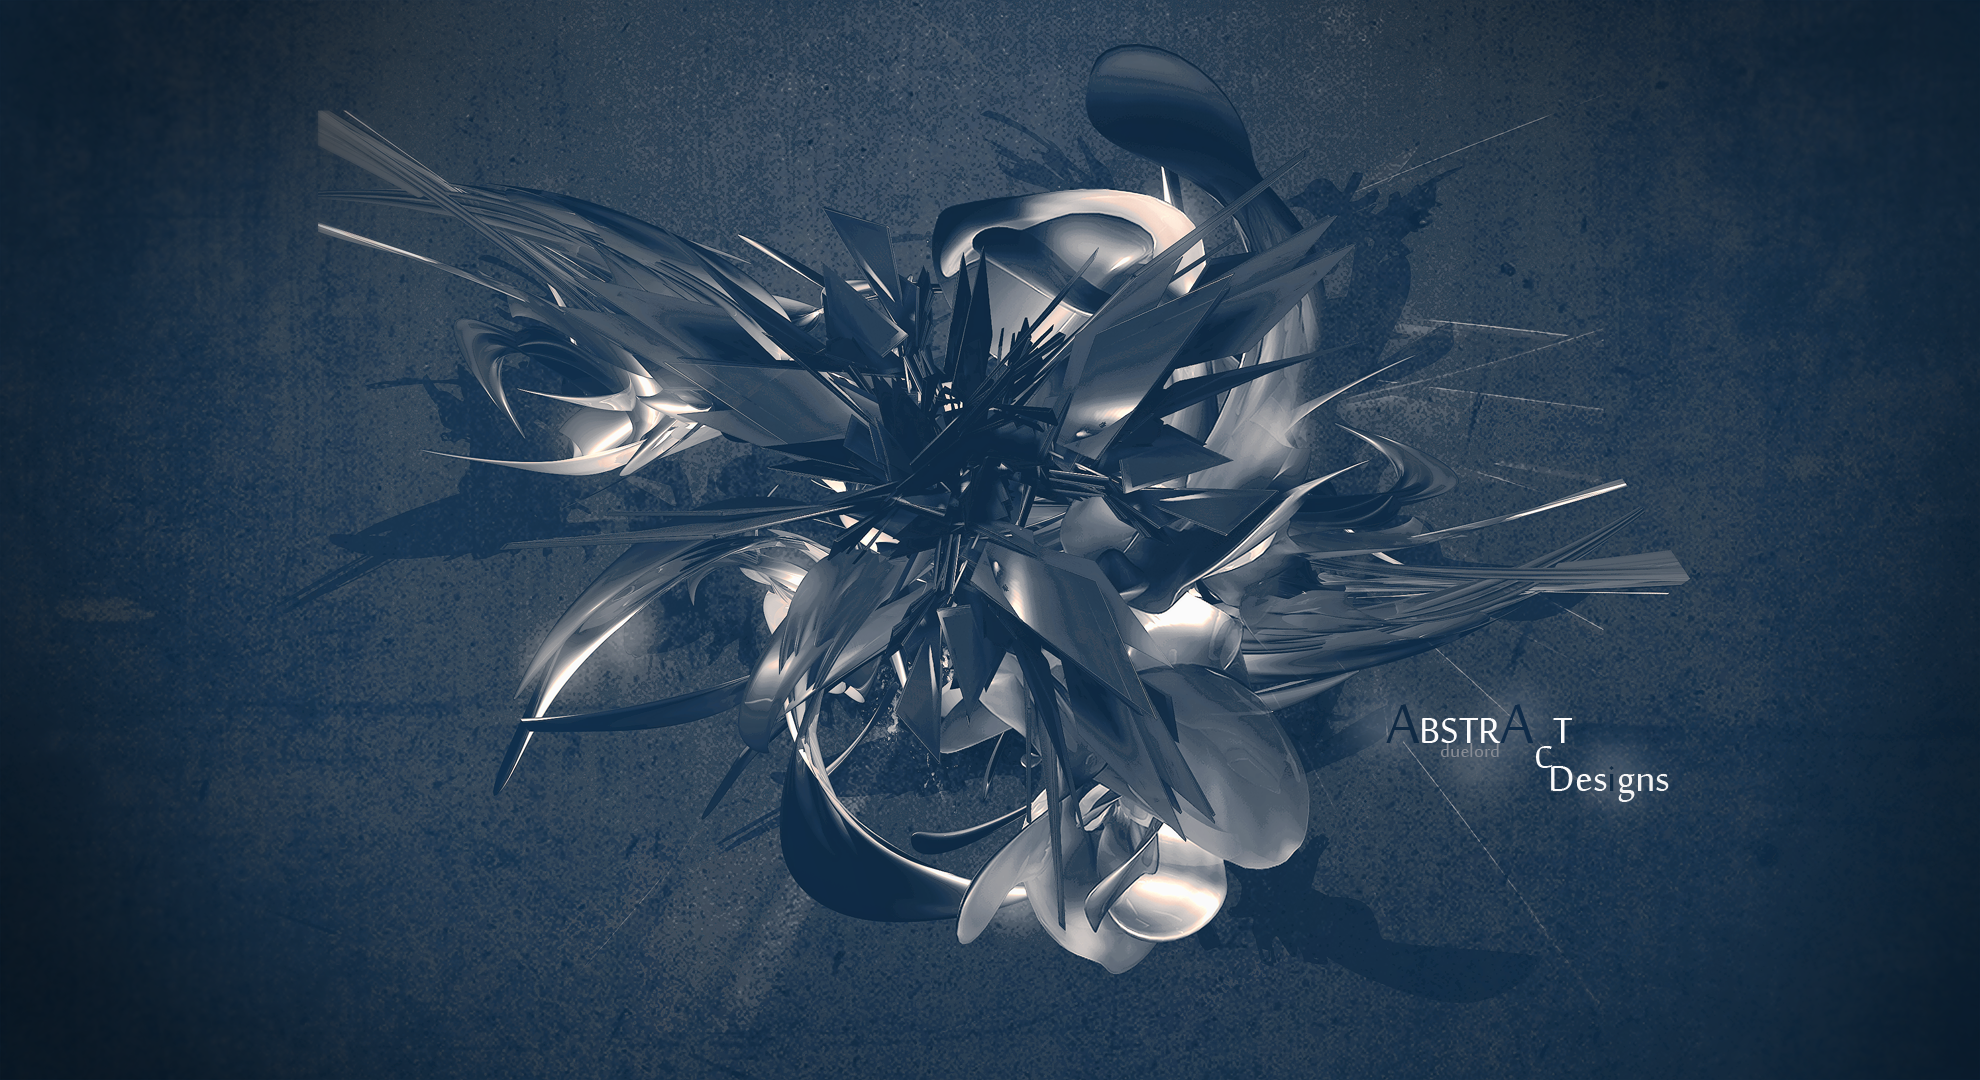 Design Wallpaper Abstract By Duelord